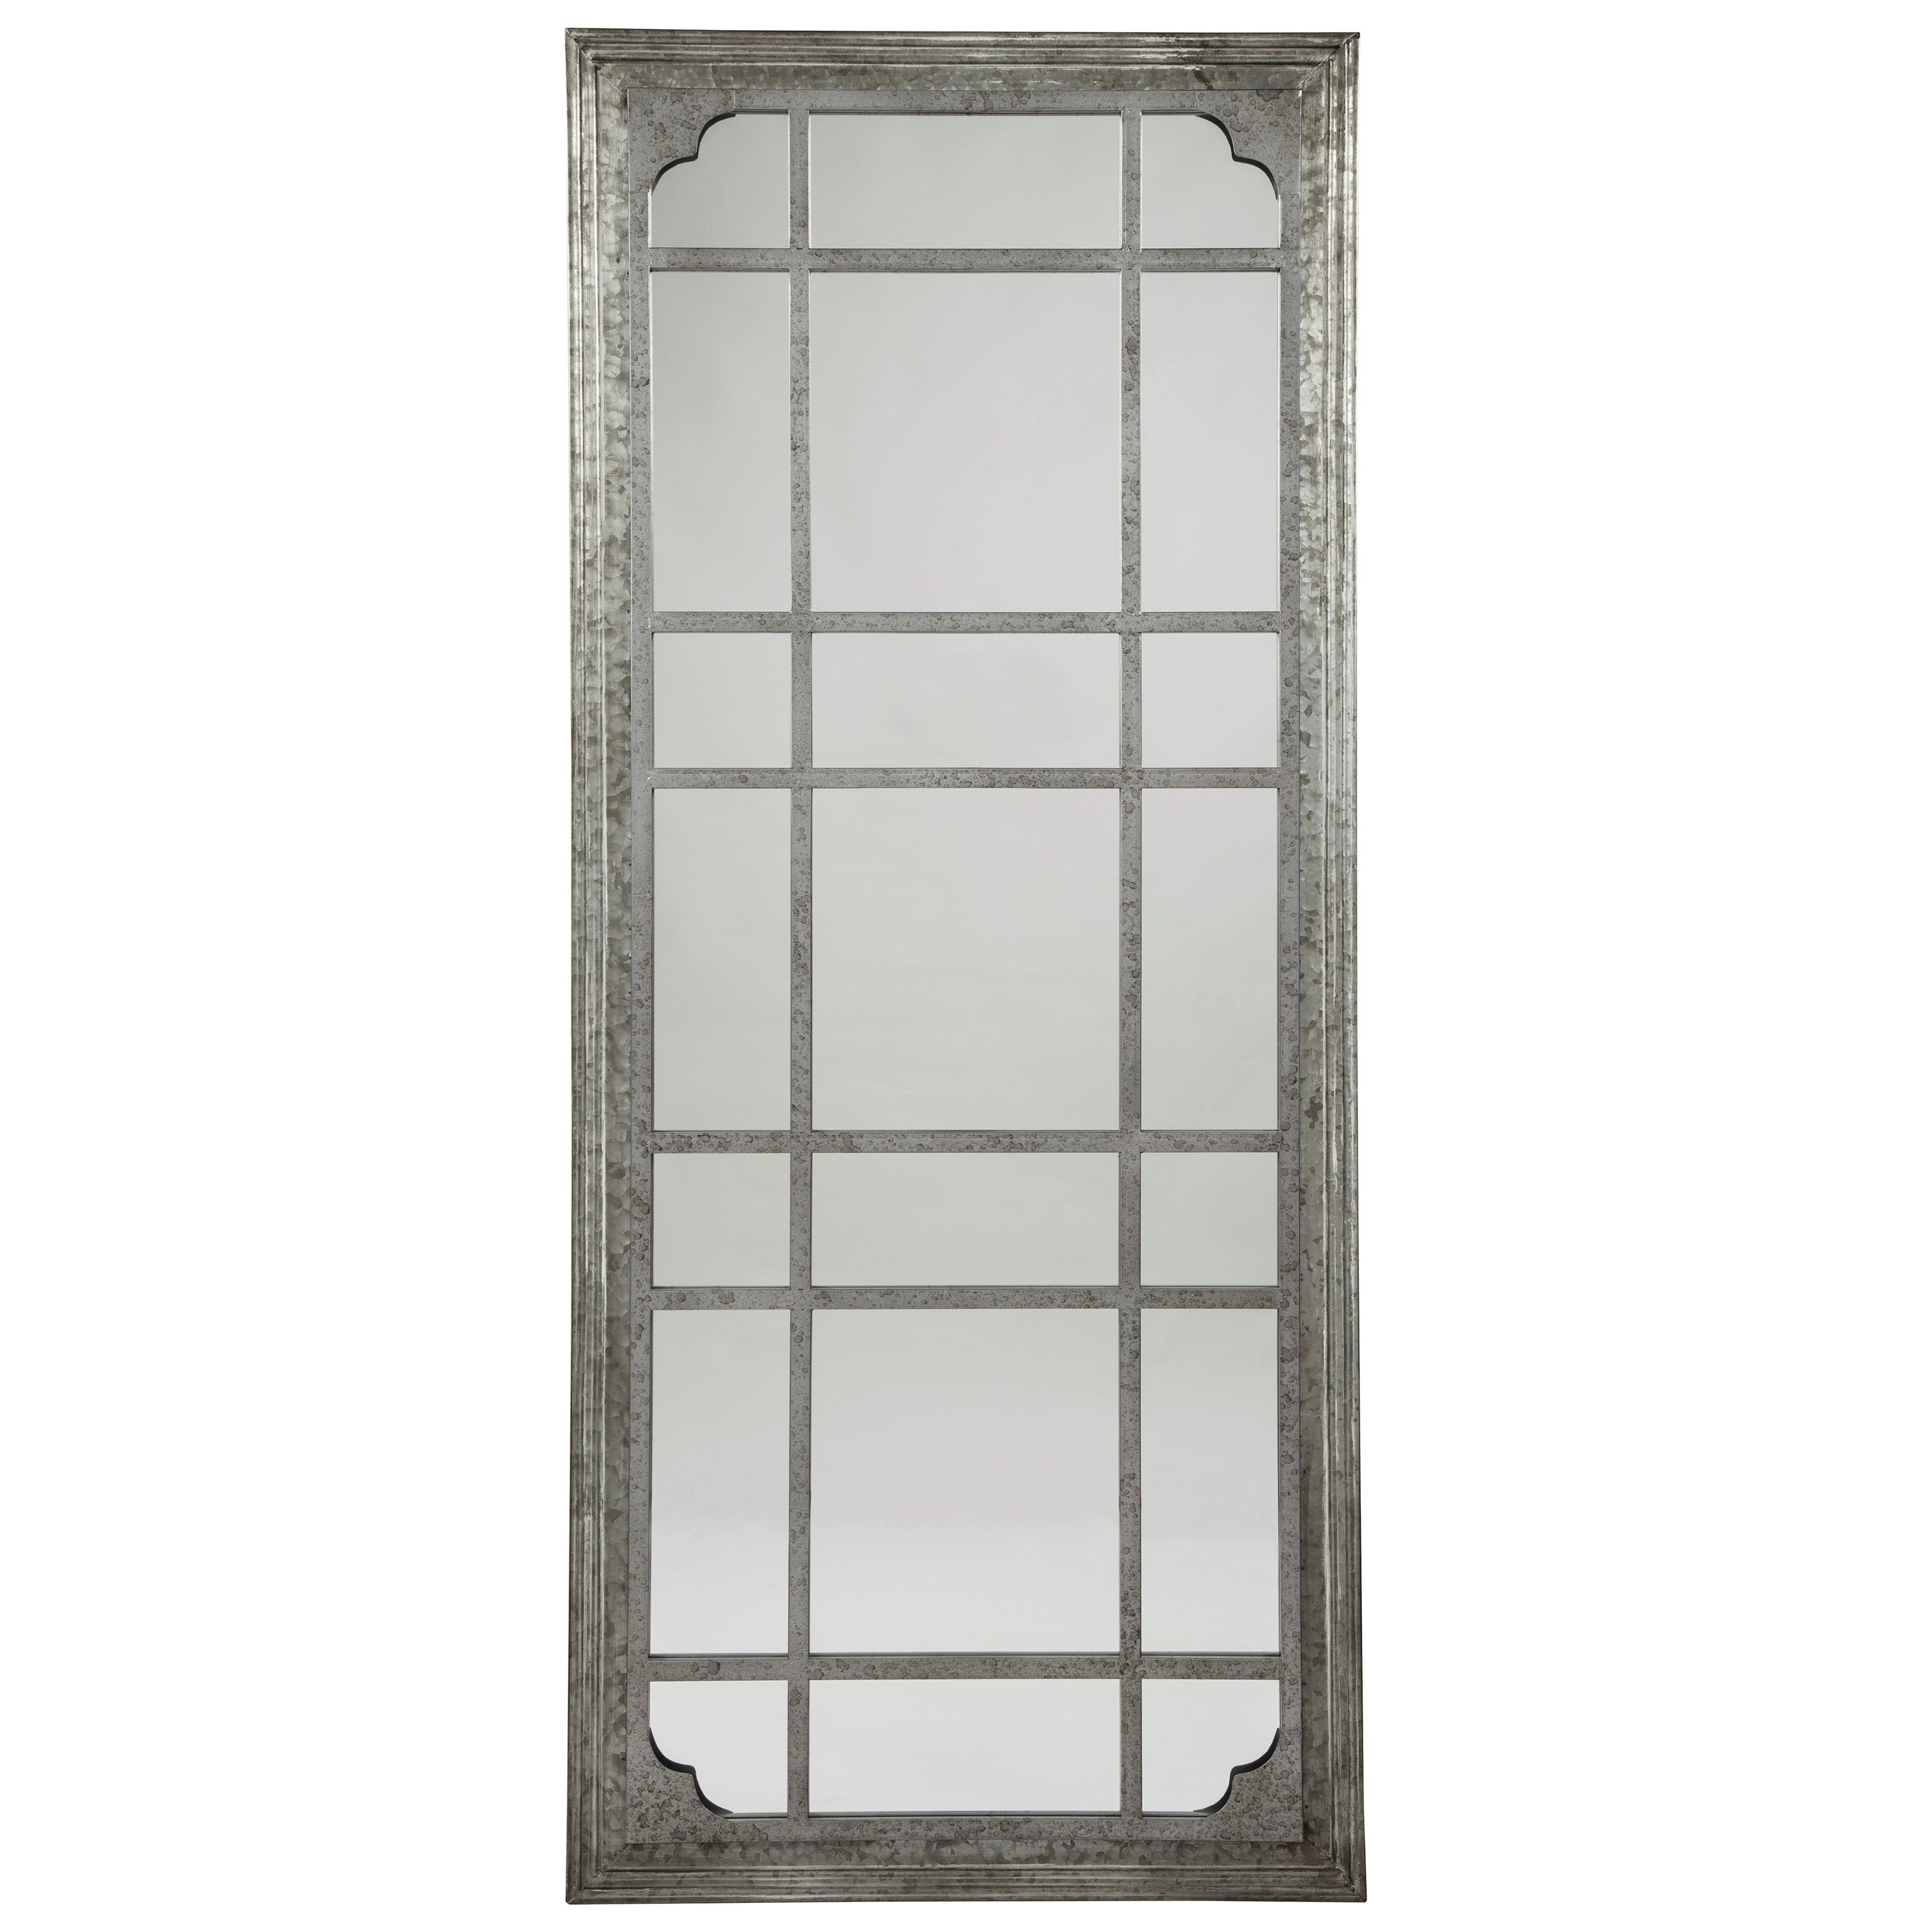 Well Liked Accent Mirrors Throughout Accent Mirrors Remy Antique Gray Accent Mirrorsignature Design Ashley At Corner Furniture (View 15 of 20)